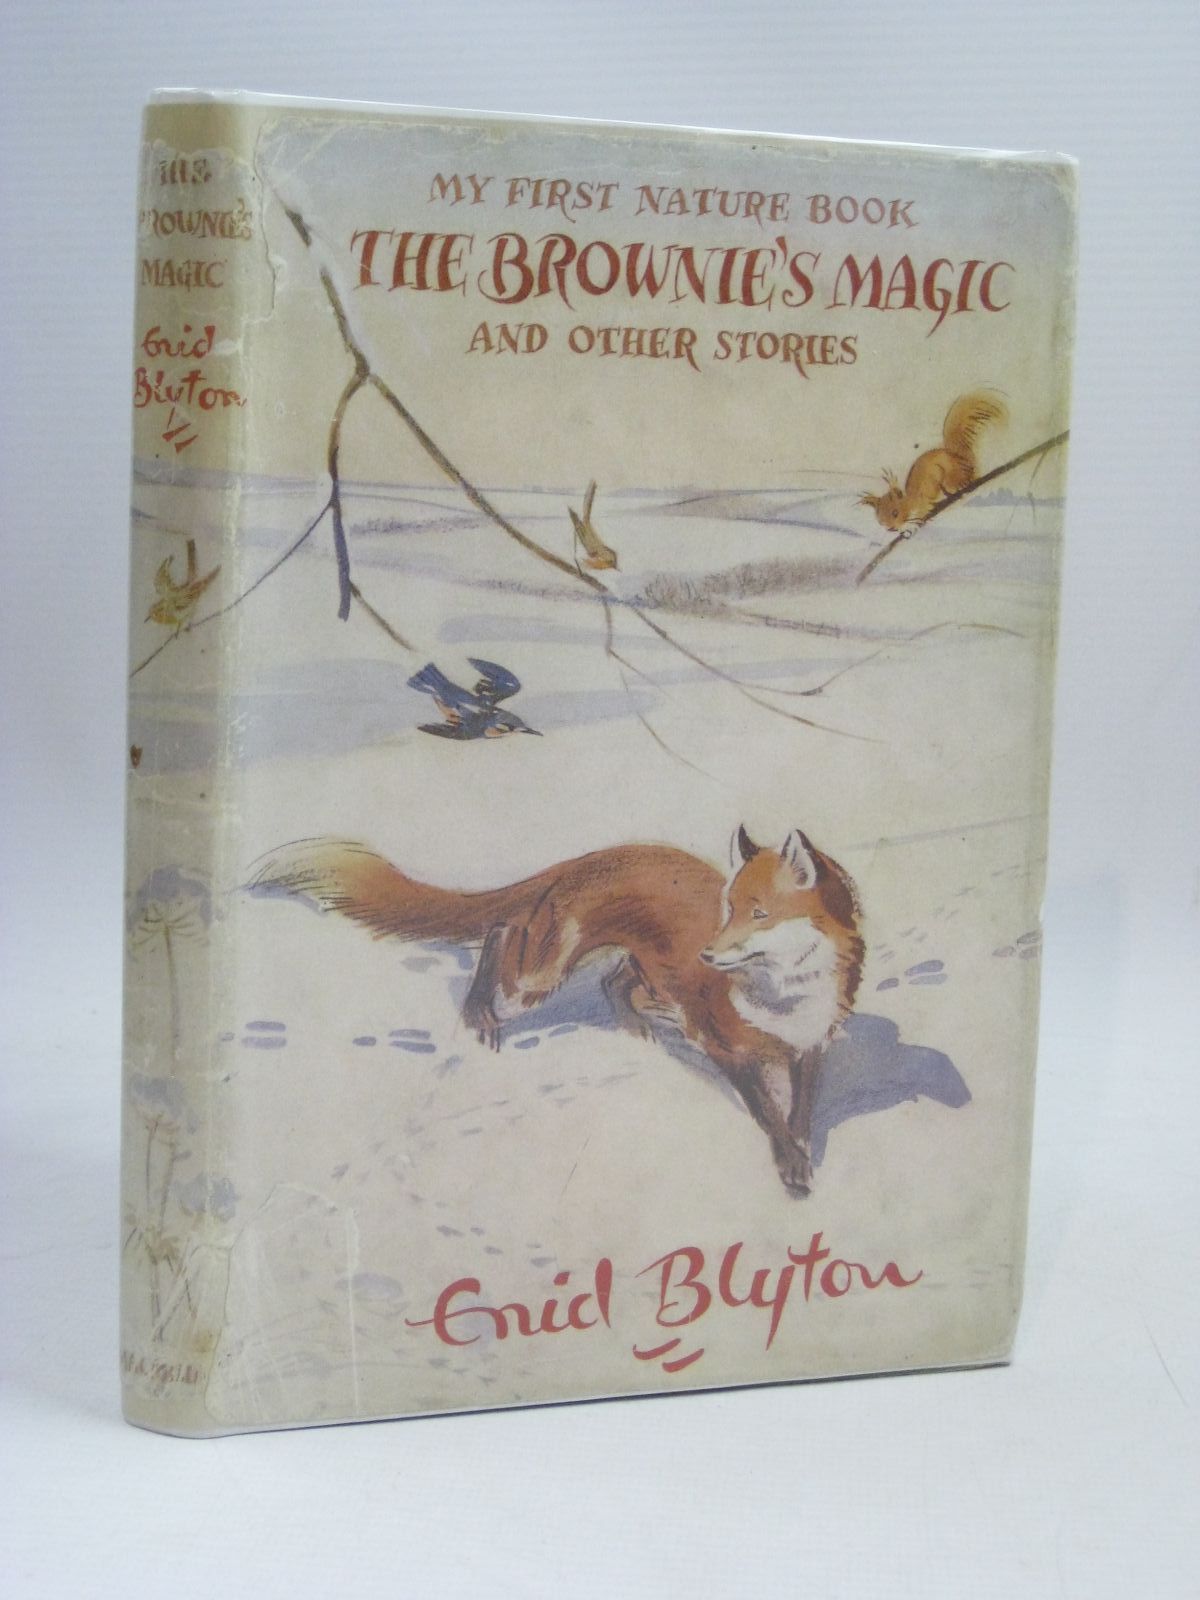 Cover of MY FIRST NATURE BOOK THE BROWNIE'S MAGIC AND OTHER STORIES by Enid Blyton